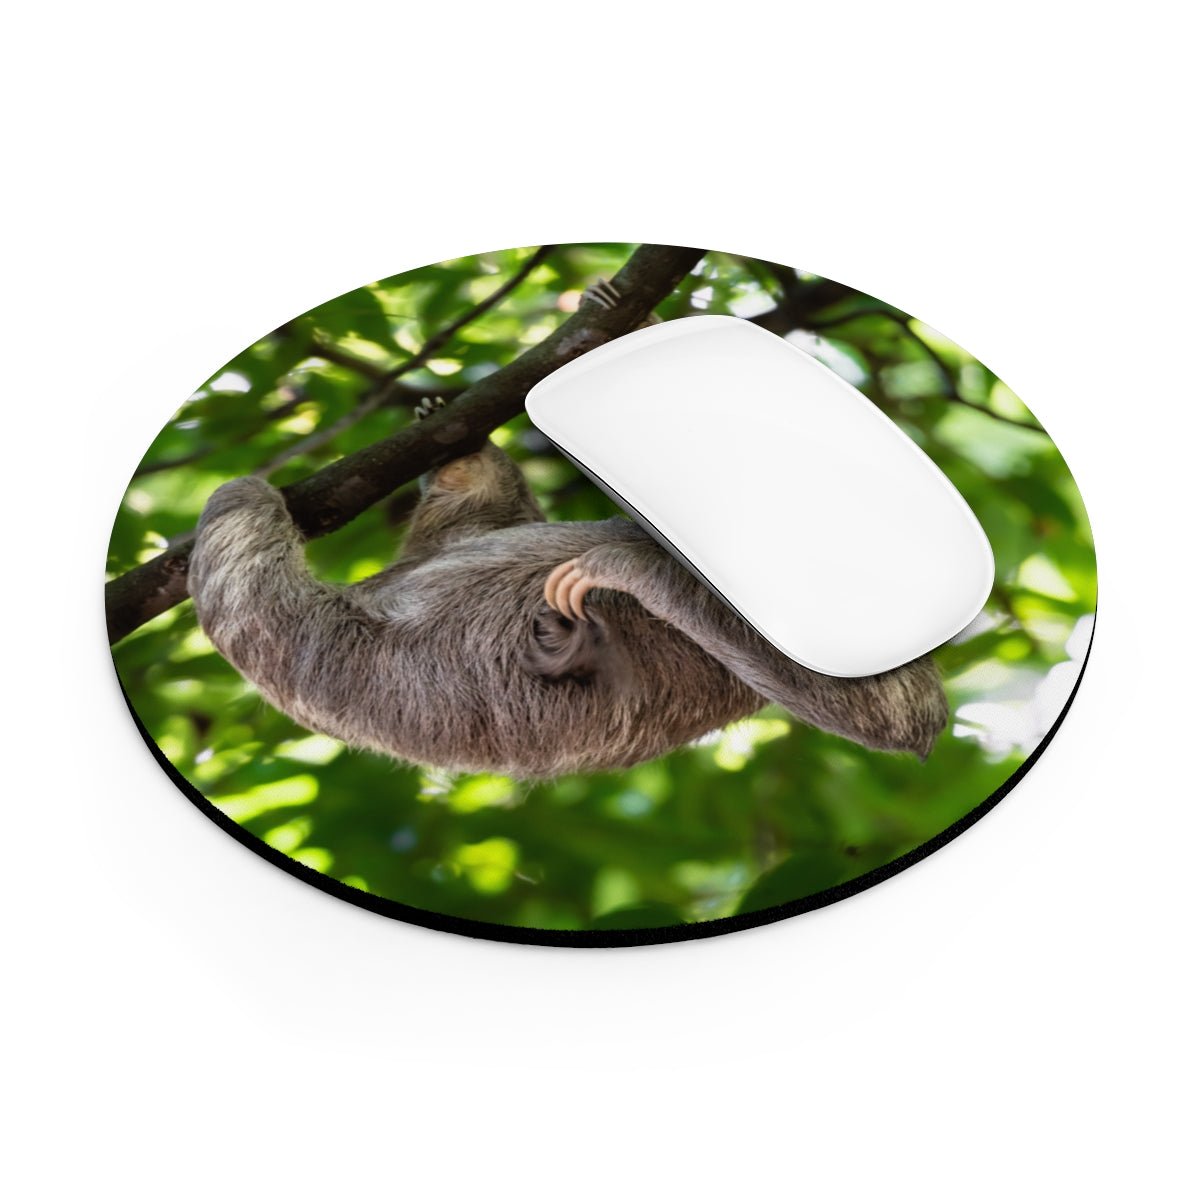 Cute Hanging Sloth Mouse Pad - Puffin Lime